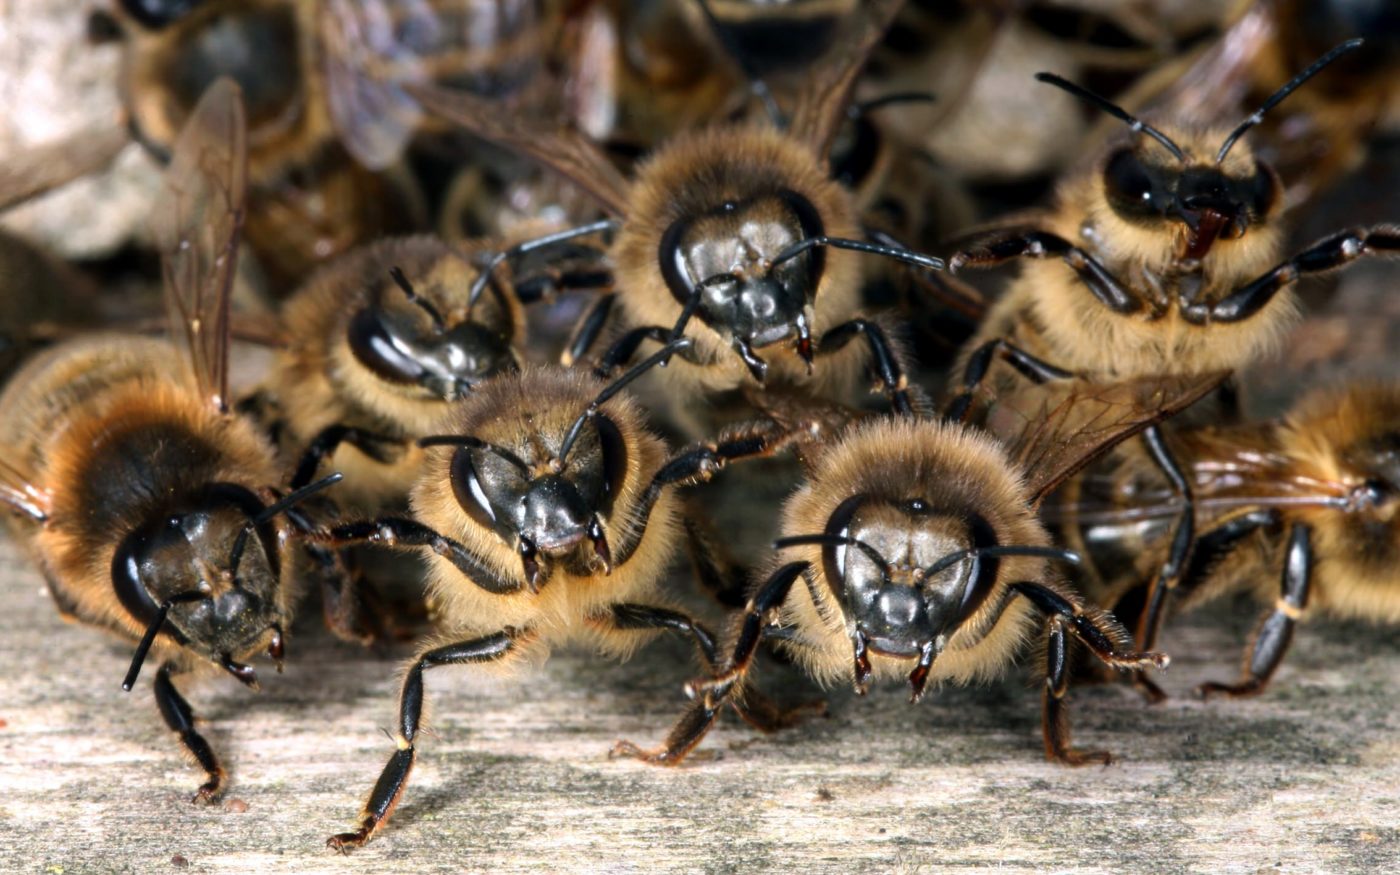 On guard! Worker honey bees, Apis mellifera, protect their nest